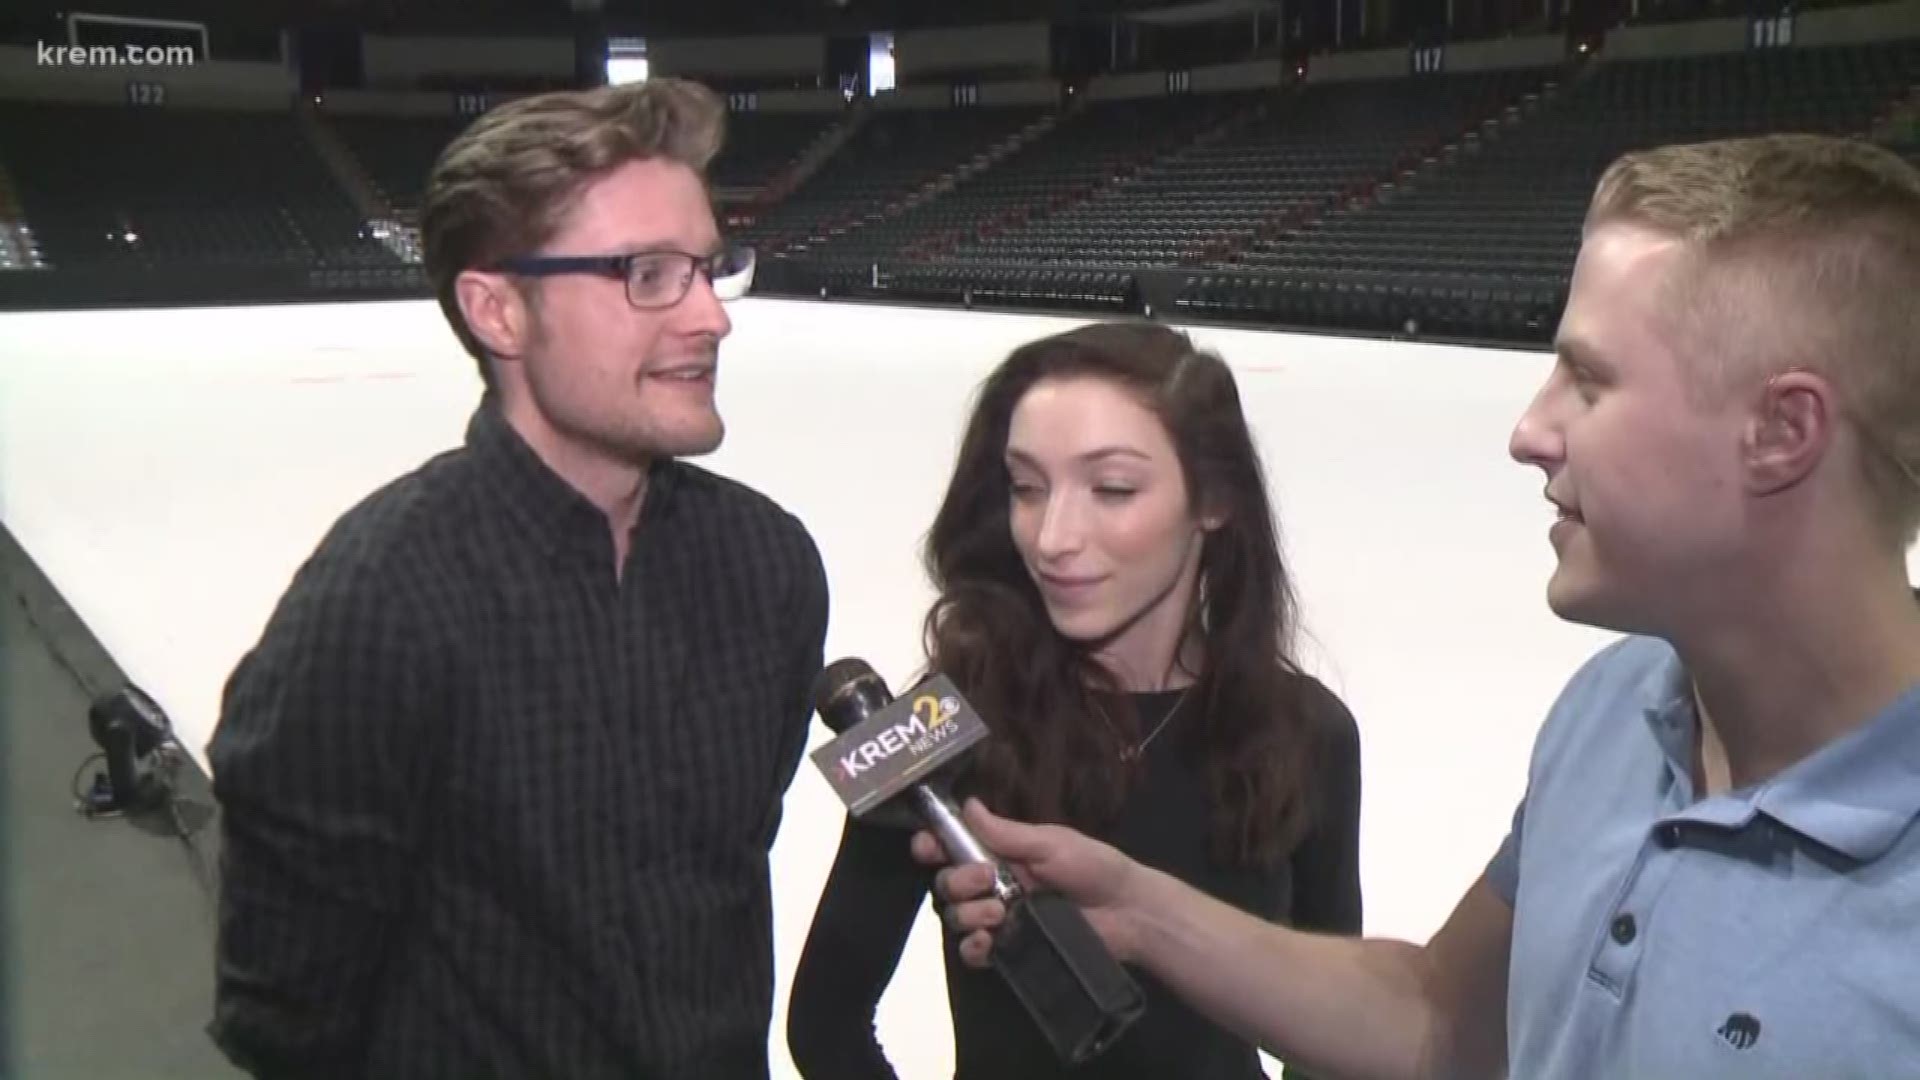 Stars on Ice begins Friday at the Spokane Arena at 7:30 p.m.